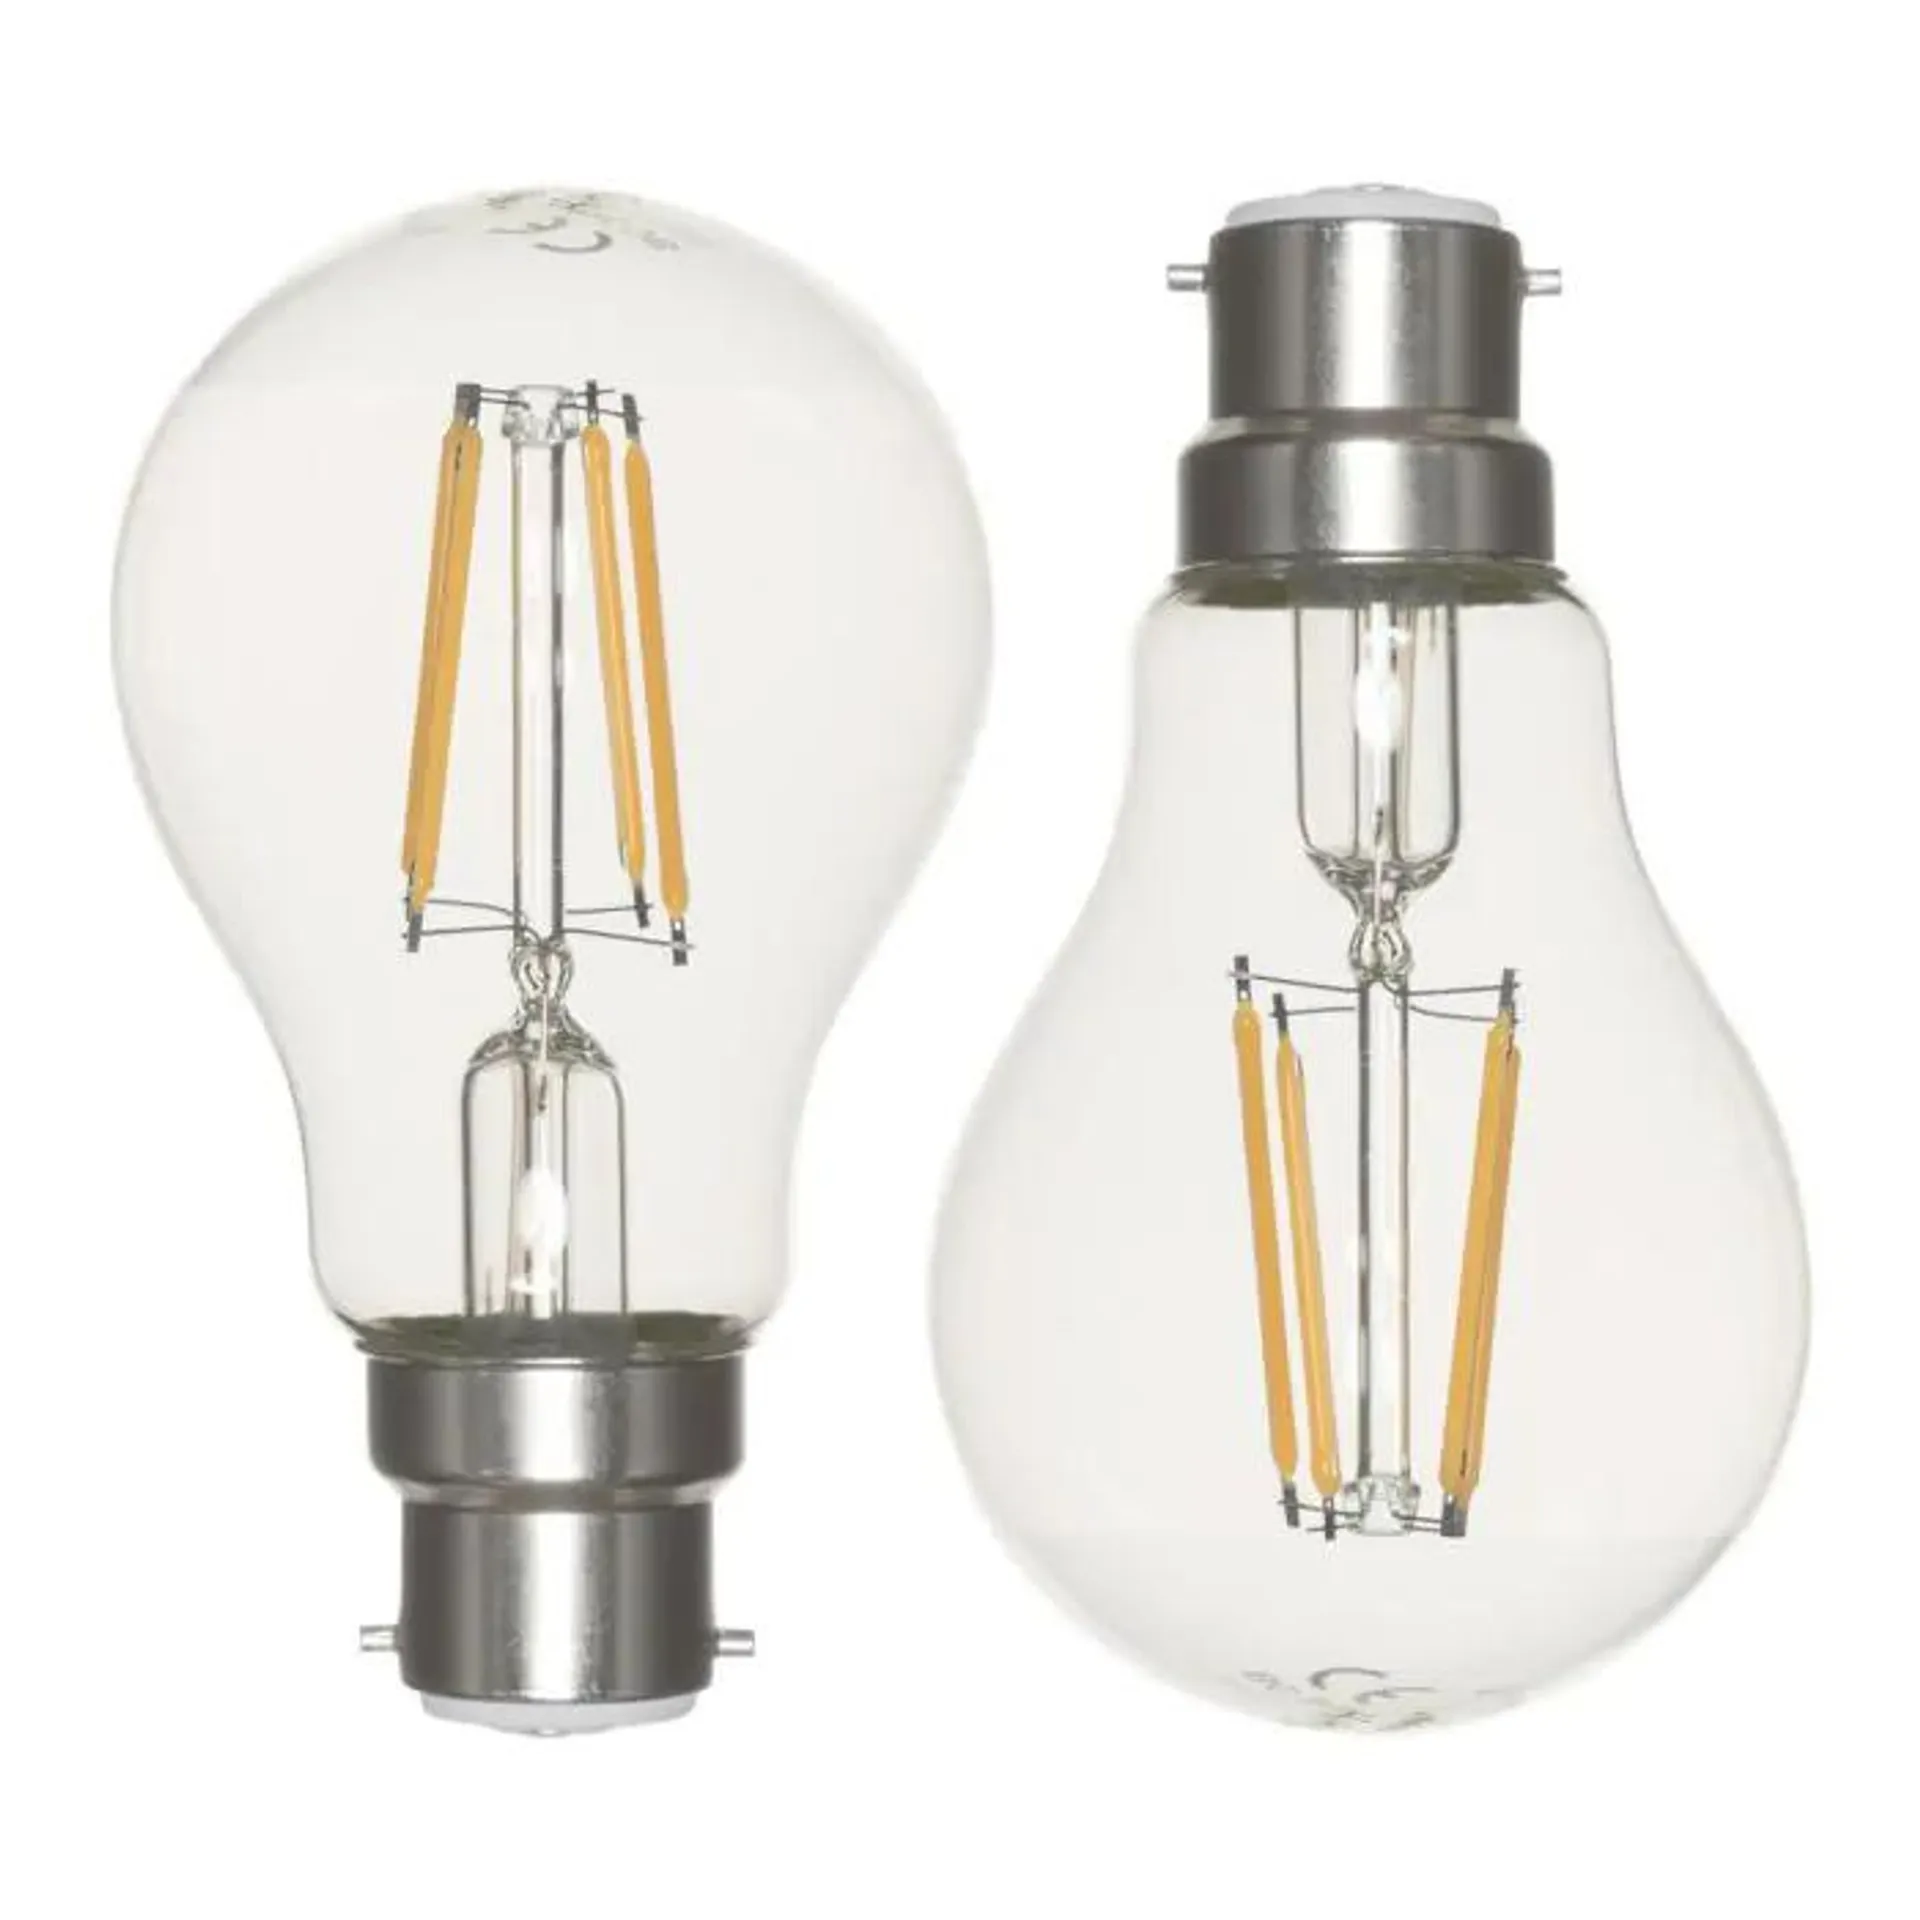 2 Pack of 6W LED Vintage Style BC B22 Classic Light Bulb, Natural White